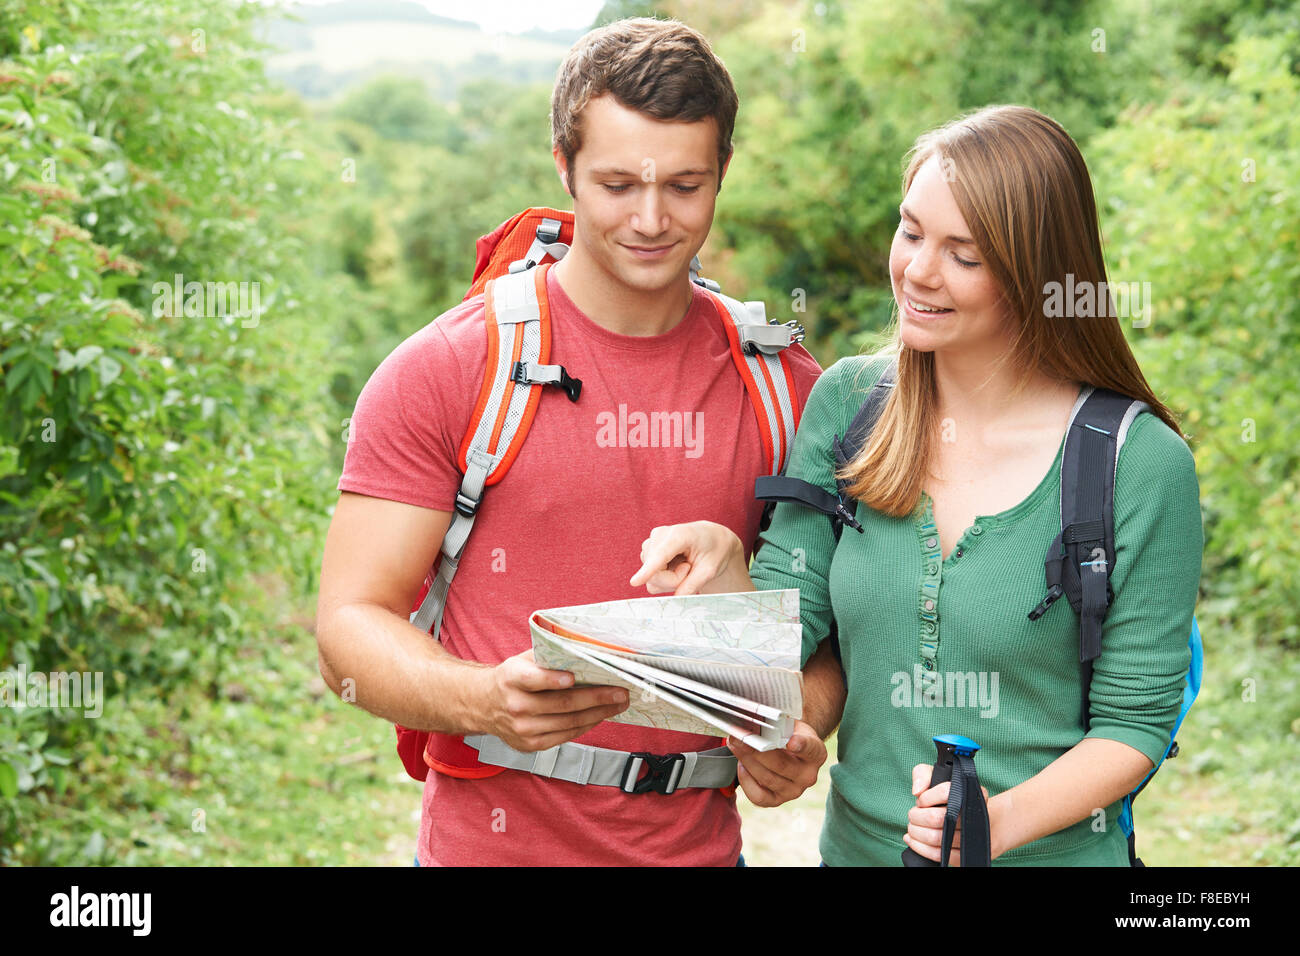 Young Couple Hiking In The Countryside Stock Photo